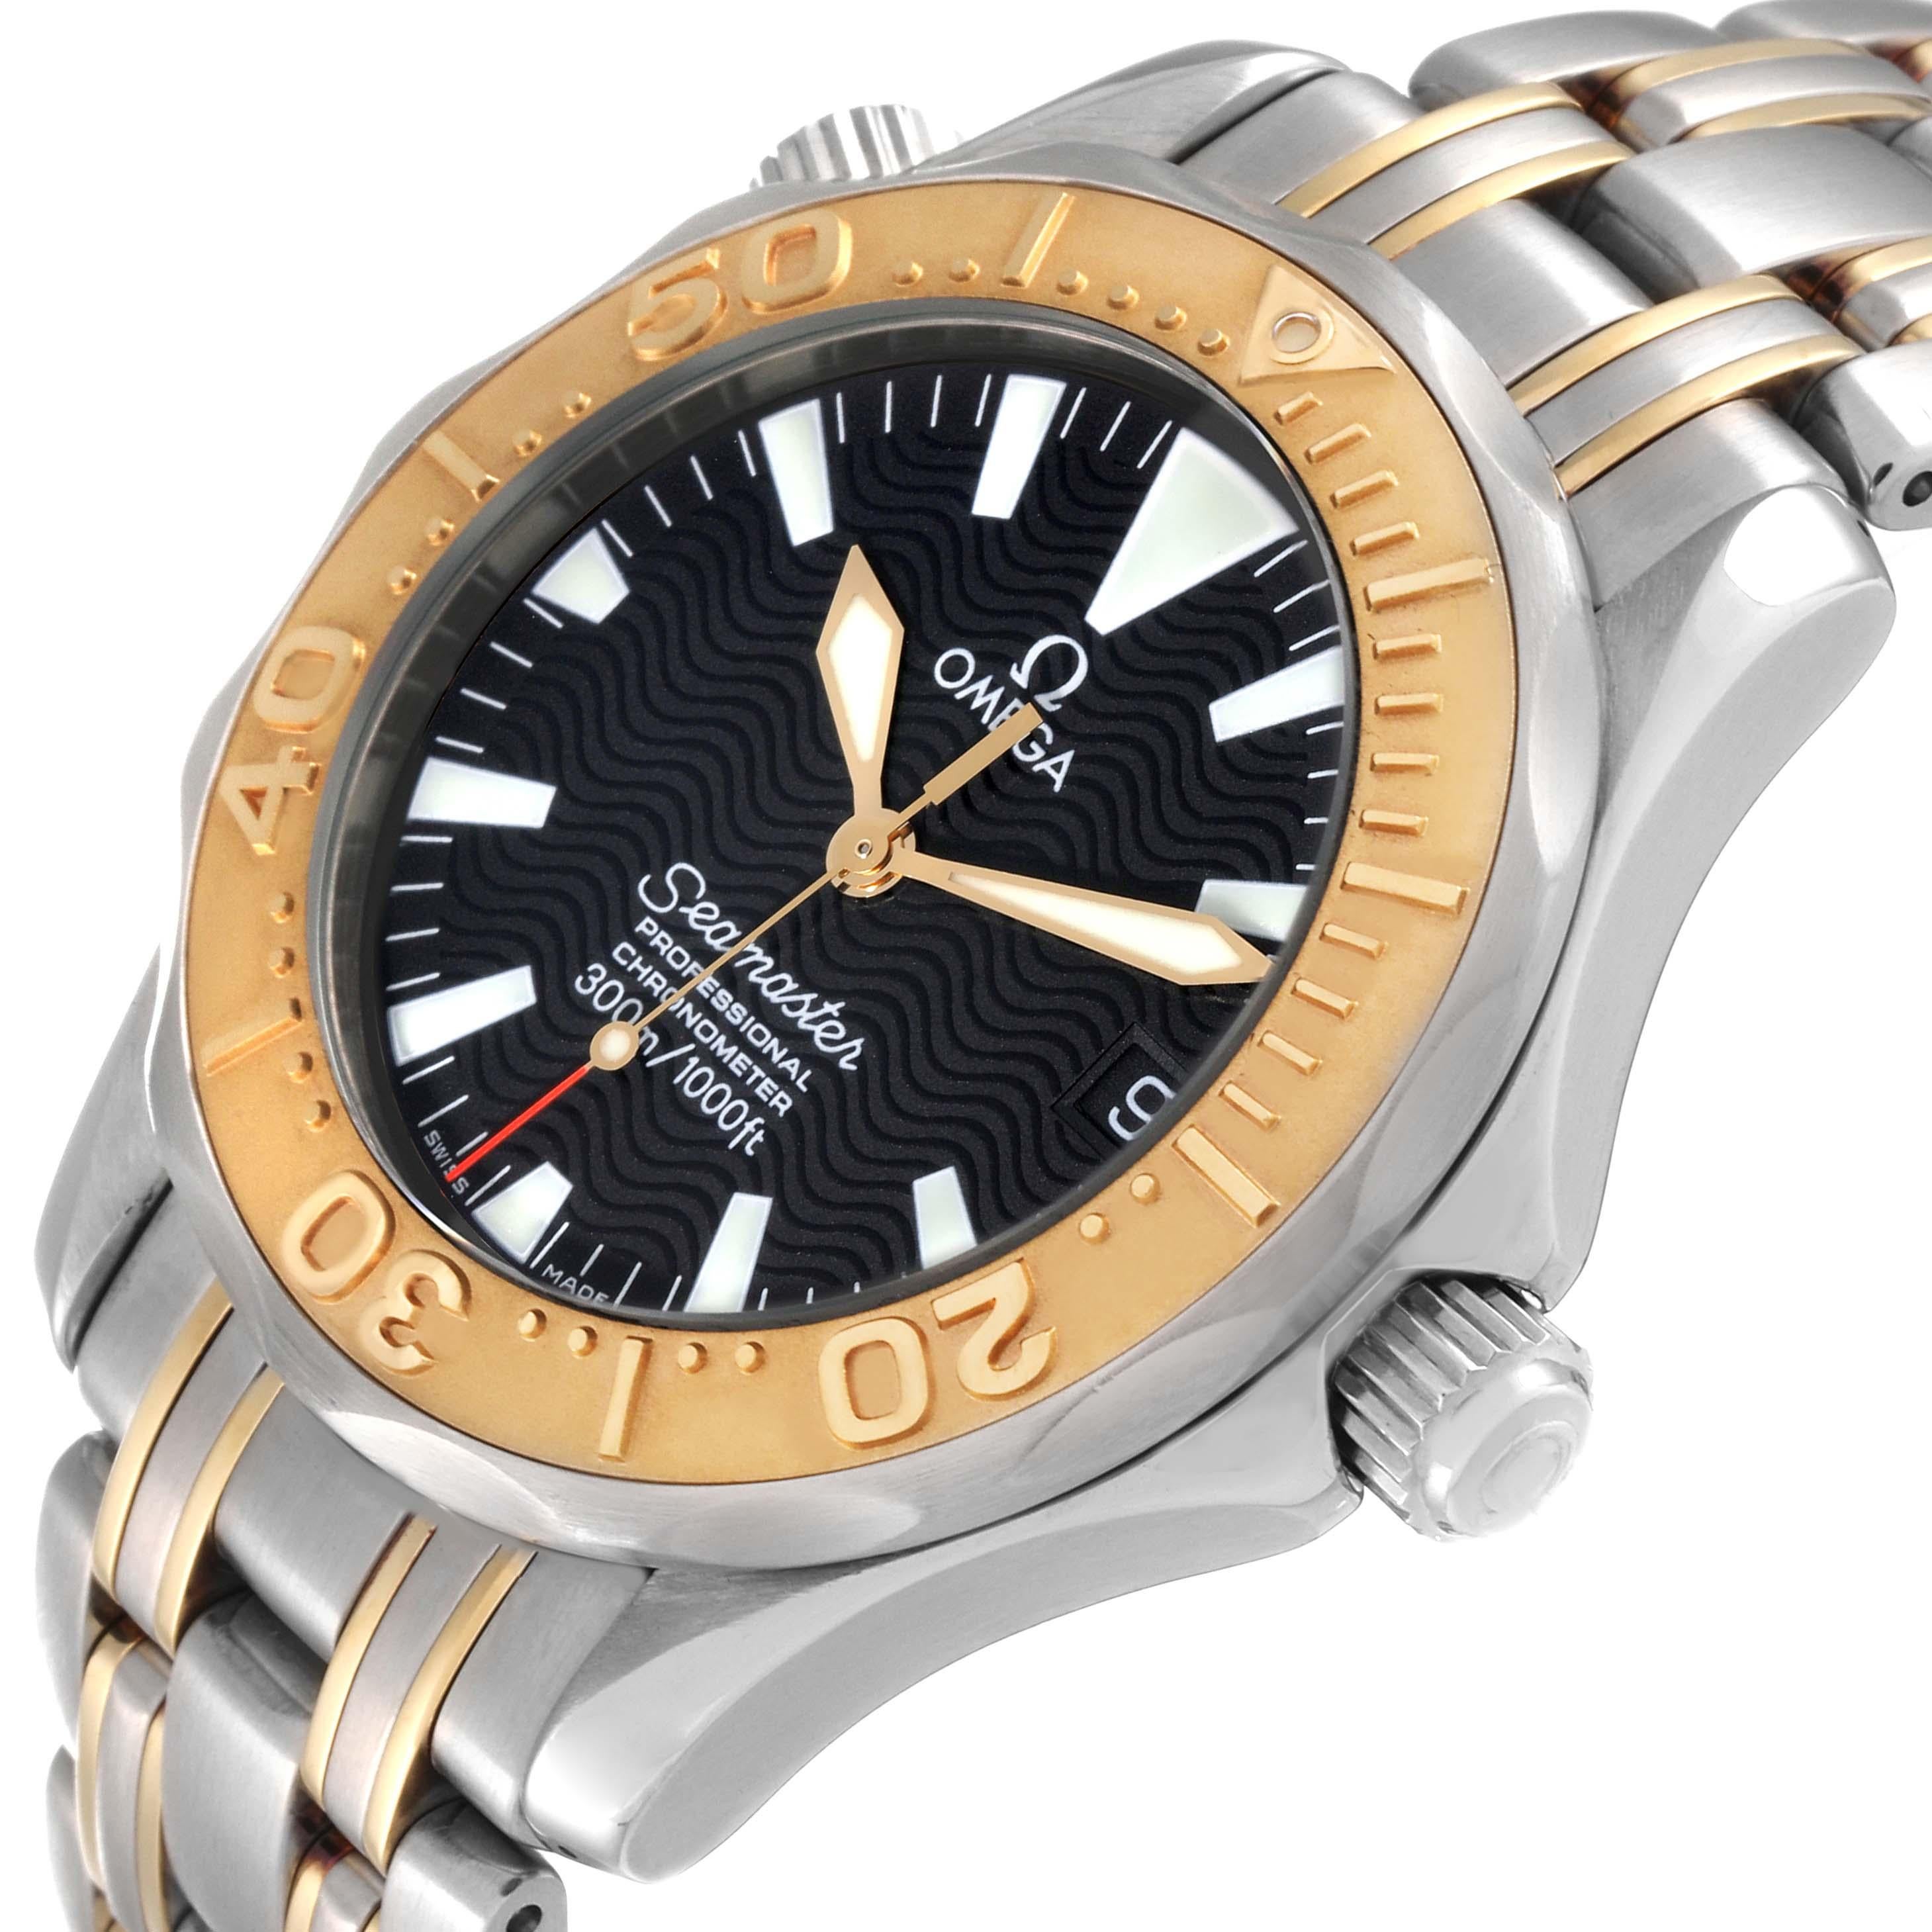 Omega Seamaster 36 Midsize Yellow Gold Steel Mens Watch 2453.50.00. Automatic self-winding movement. Caliber 1120. Stainless steel round case 36.25 mm in diameter. 18K yellow gold unidirectional rotating bezel. Scratch resistant sapphire crystal.